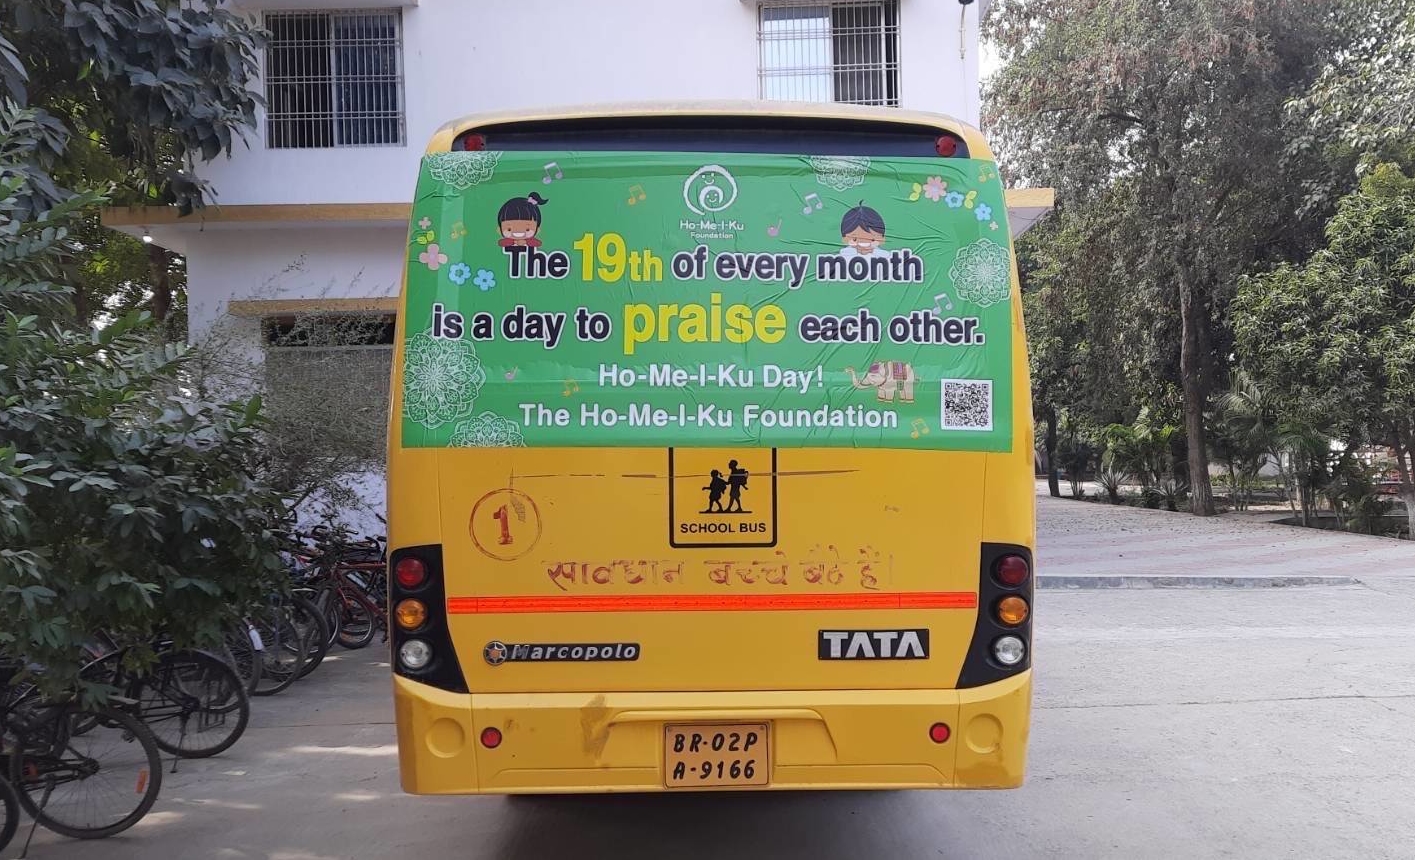 A school bus in India sports an ad on the back urging people to praise each other every month. | SPIRAL UP CO. 